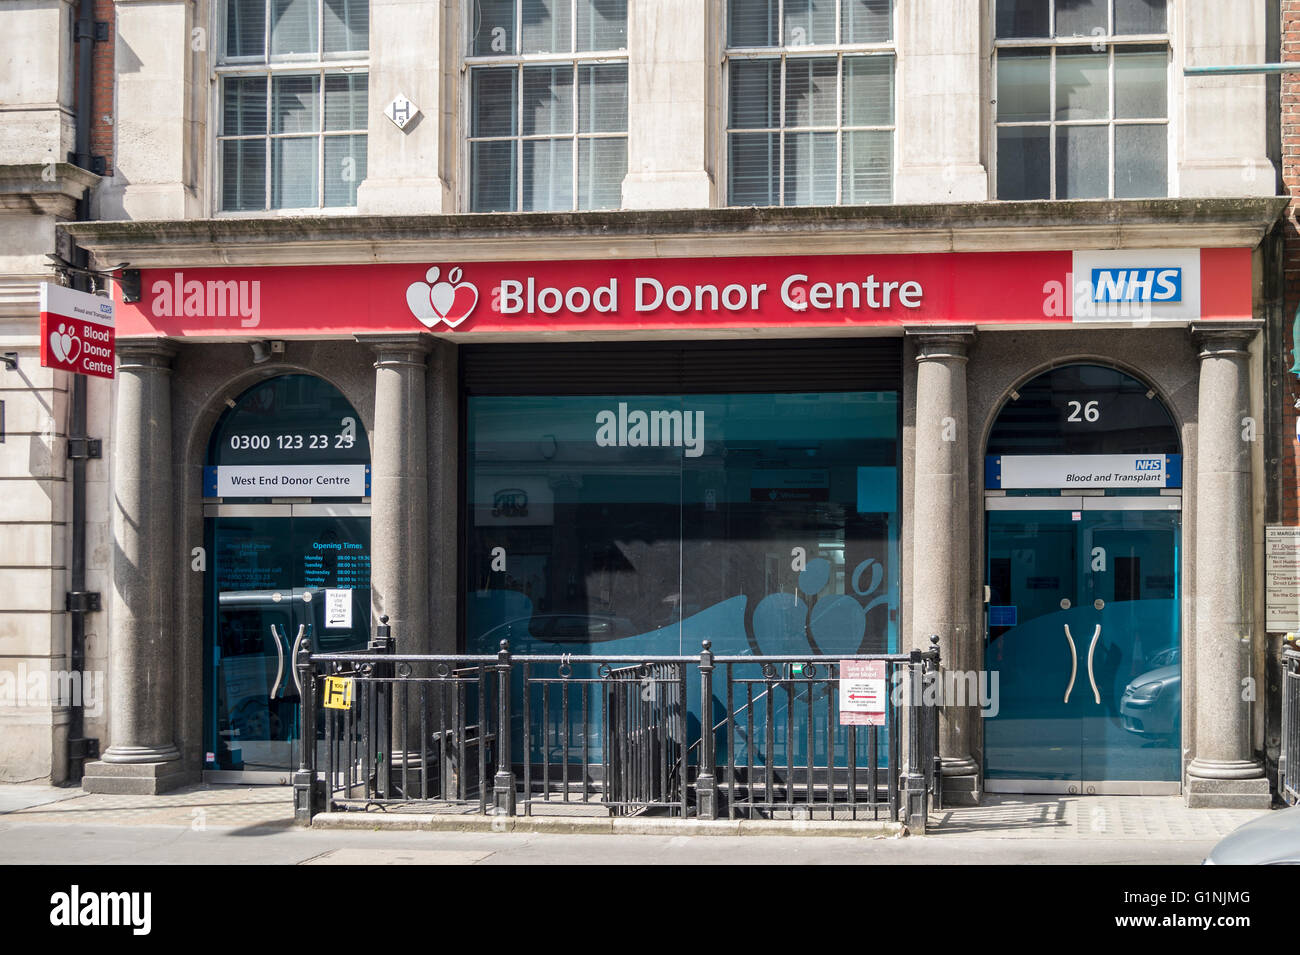 NHS Blood Donor Centre in central London Stock Photo